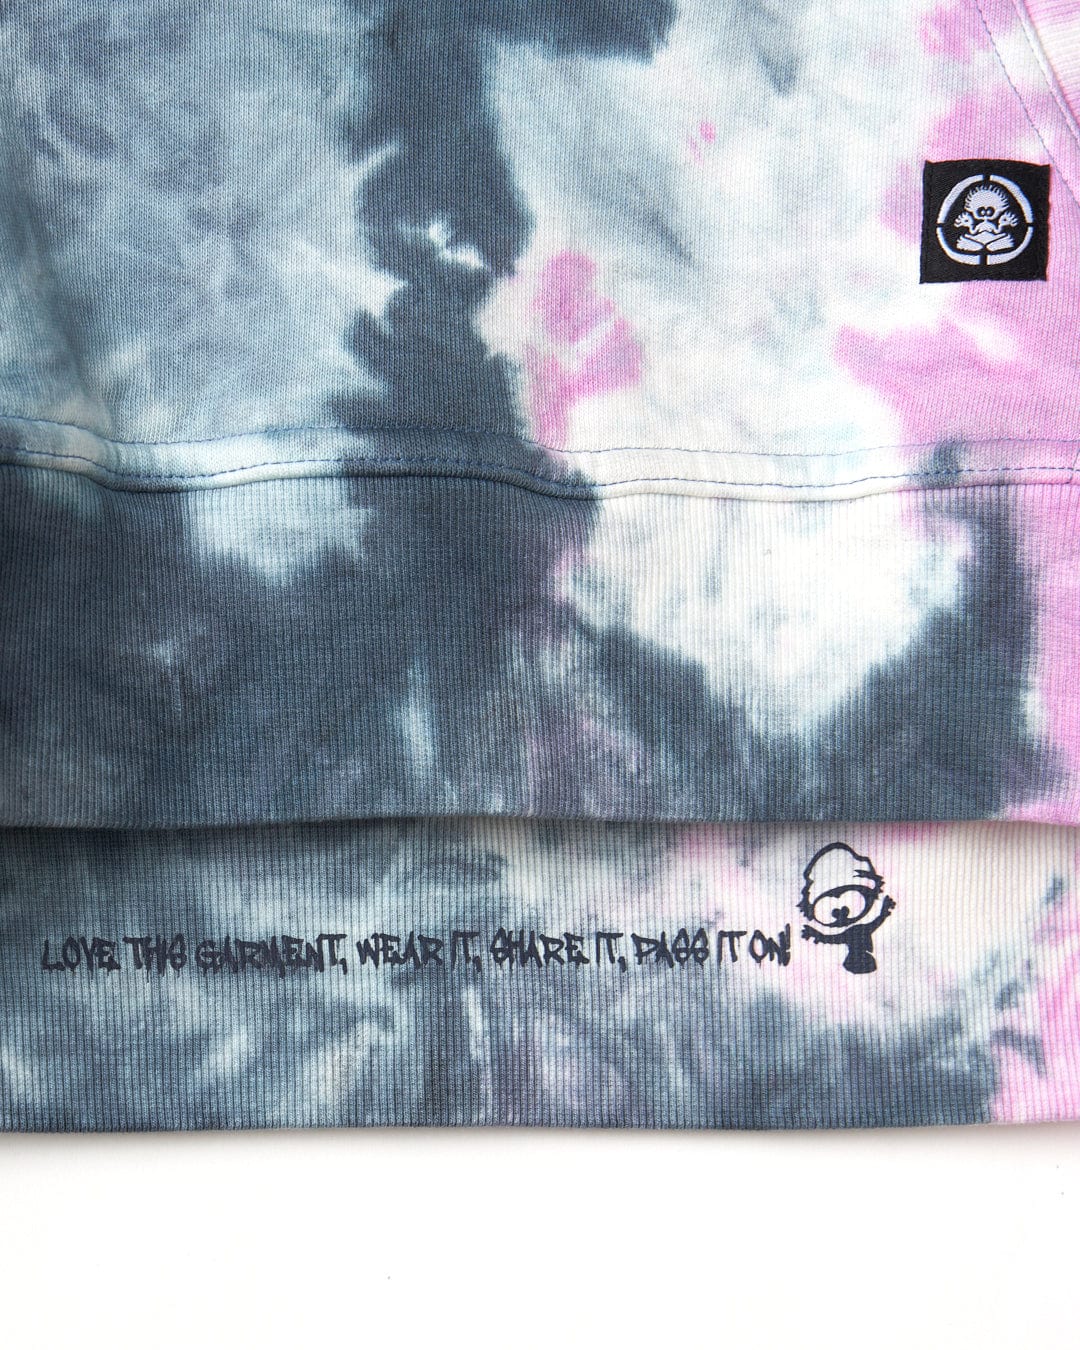 A Wave Rider Cornwall - Kids Tie Dye Pop Hoodie in pink and blue made of cotton fabric by Saltrock.